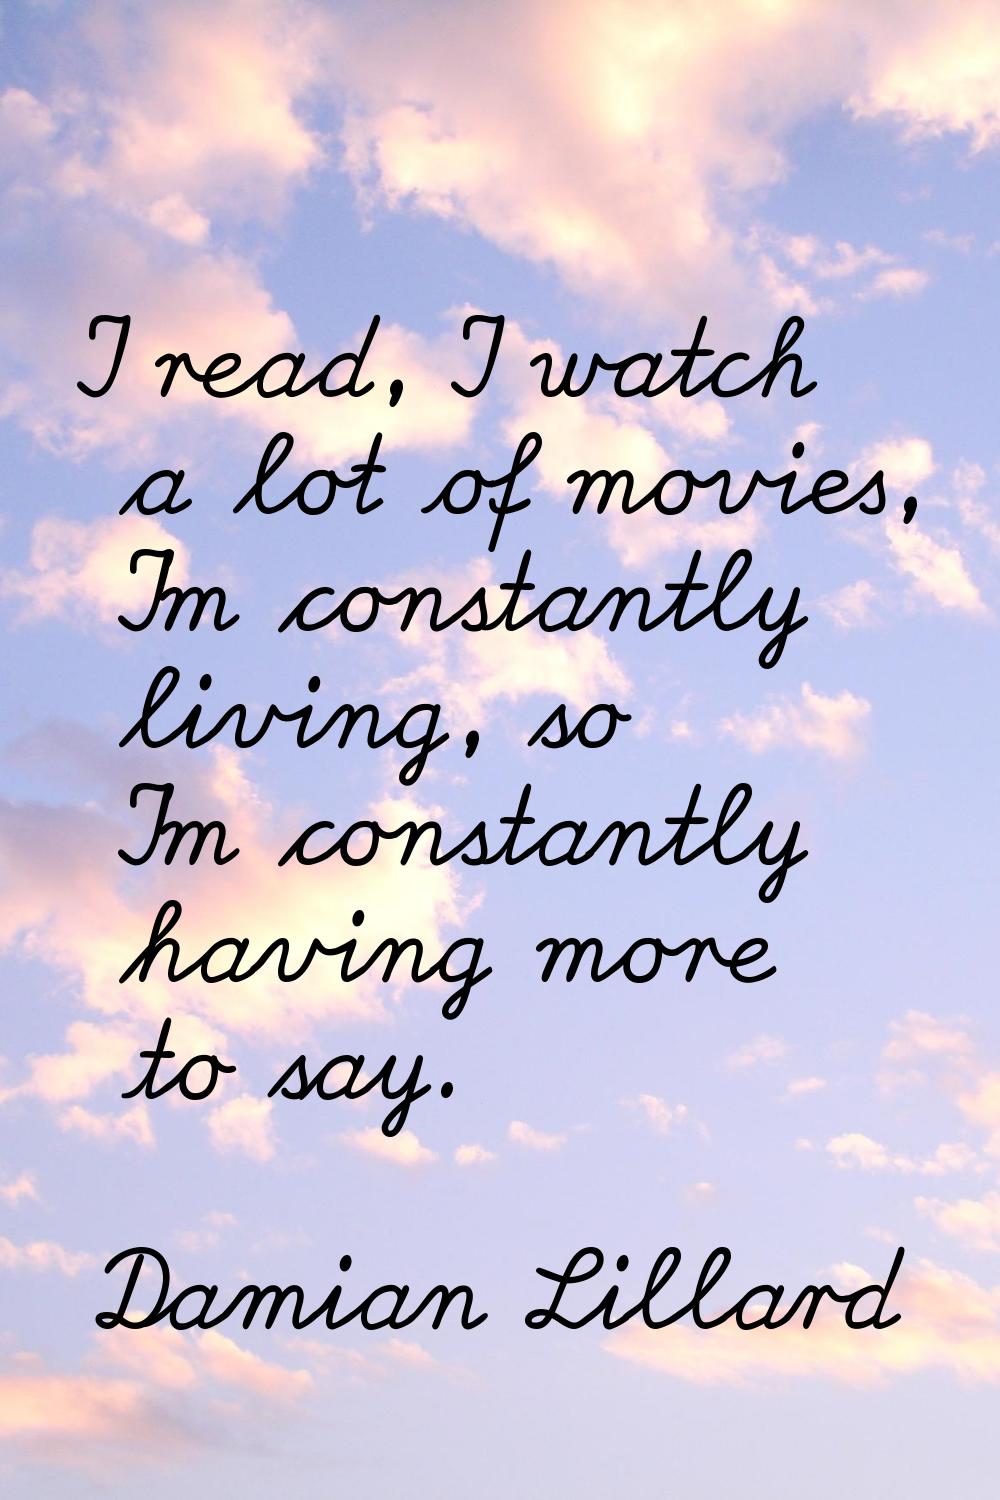 I read, I watch a lot of movies, I'm constantly living, so I'm constantly having more to say.